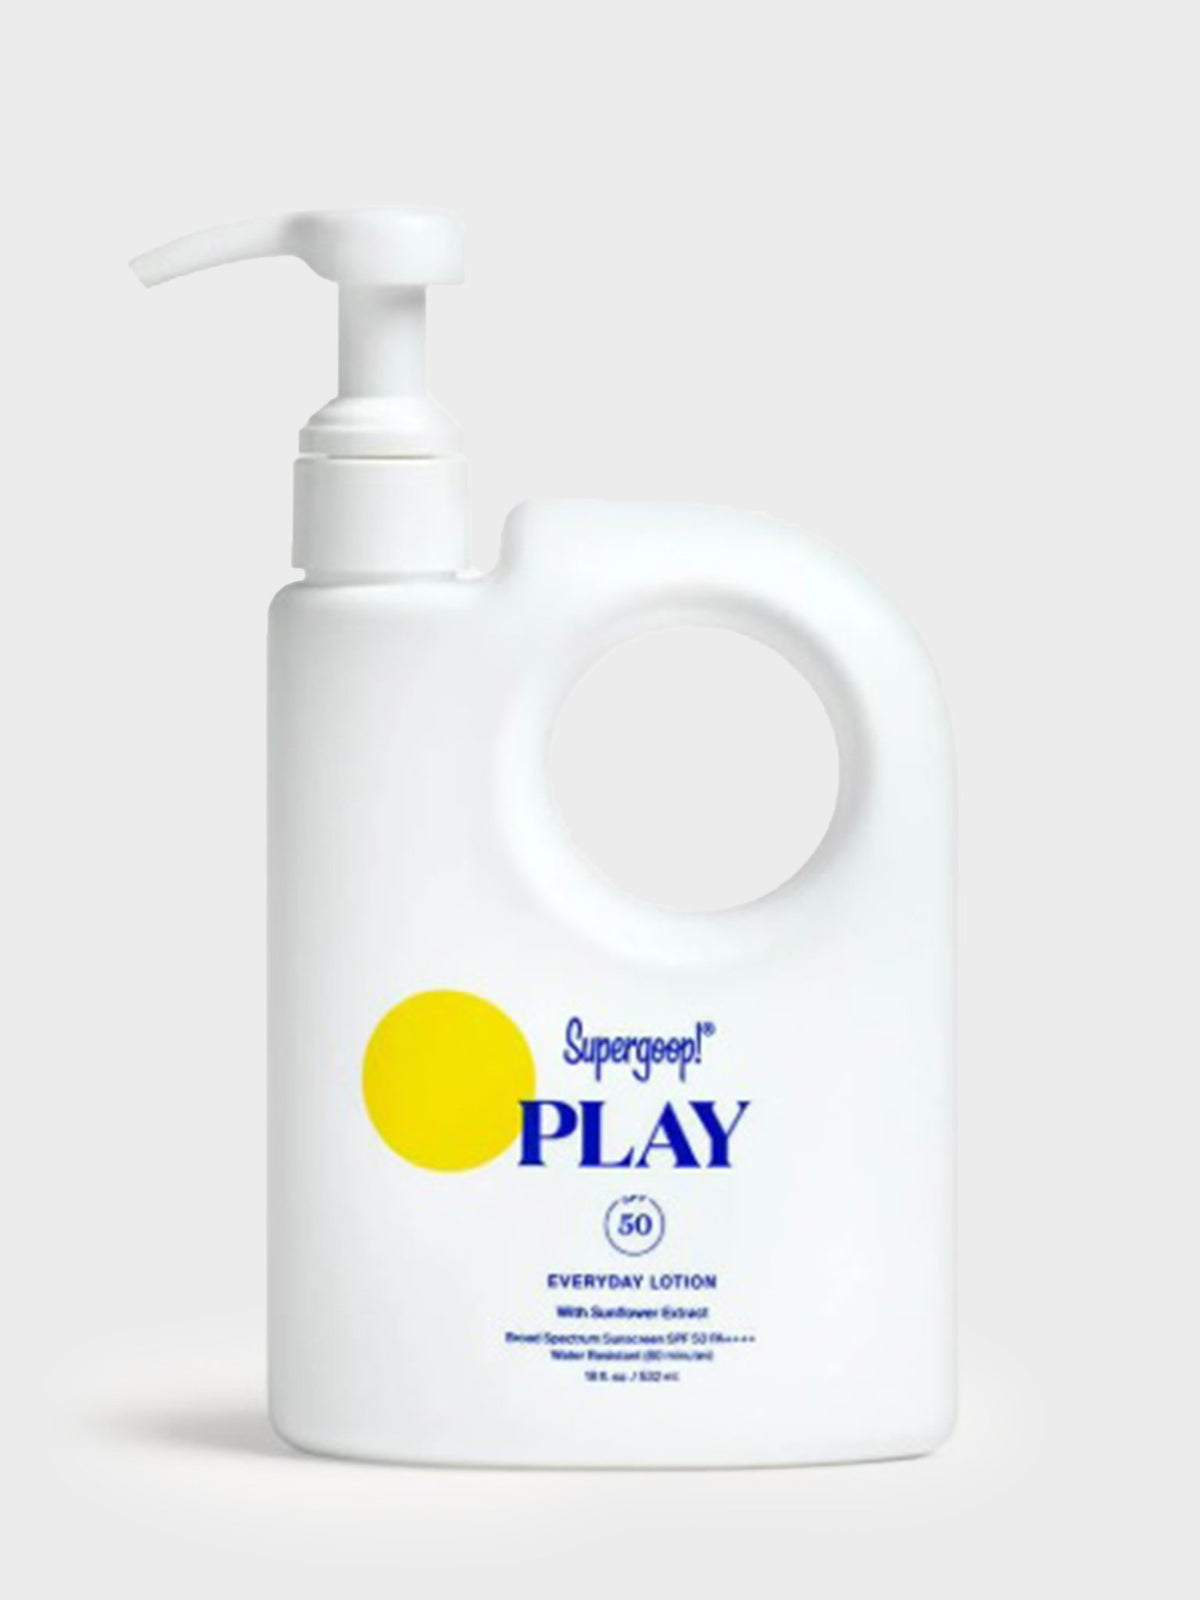 PLAY Everyday Lotion SPF 50 with Sunflower Extract (18 oz)